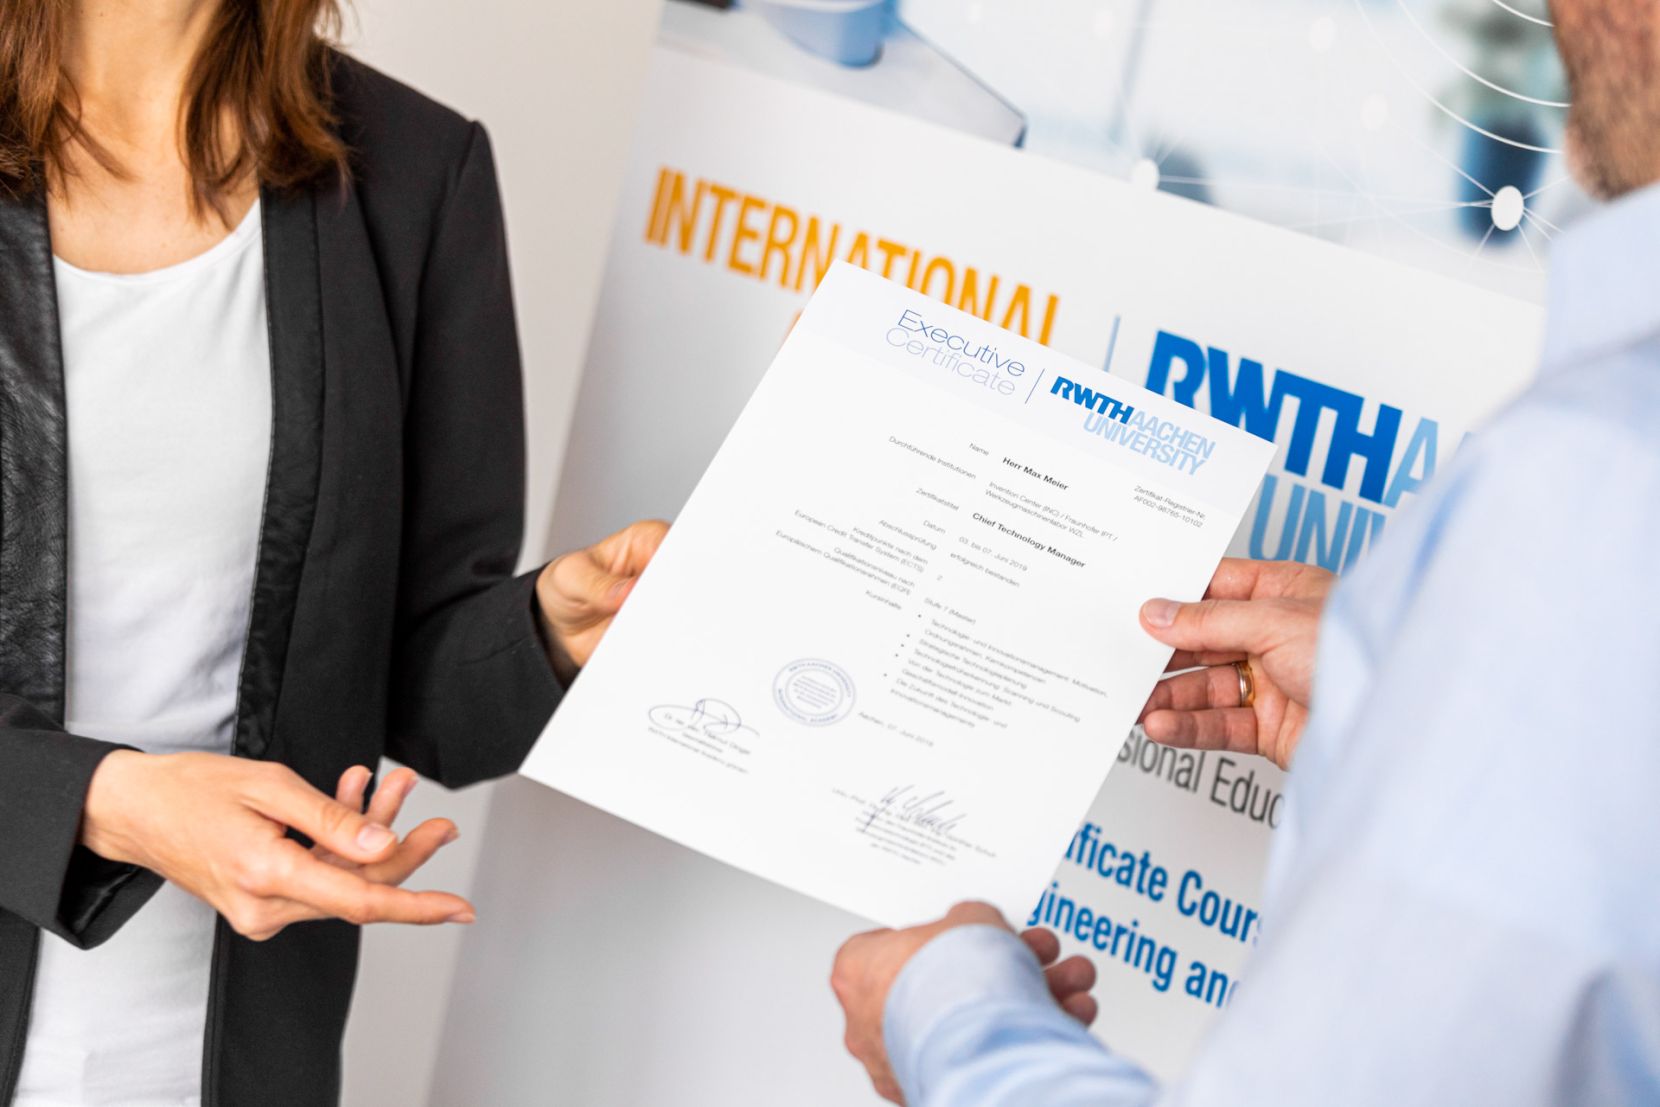 Presentation of a certificate of the RWTH International Academy